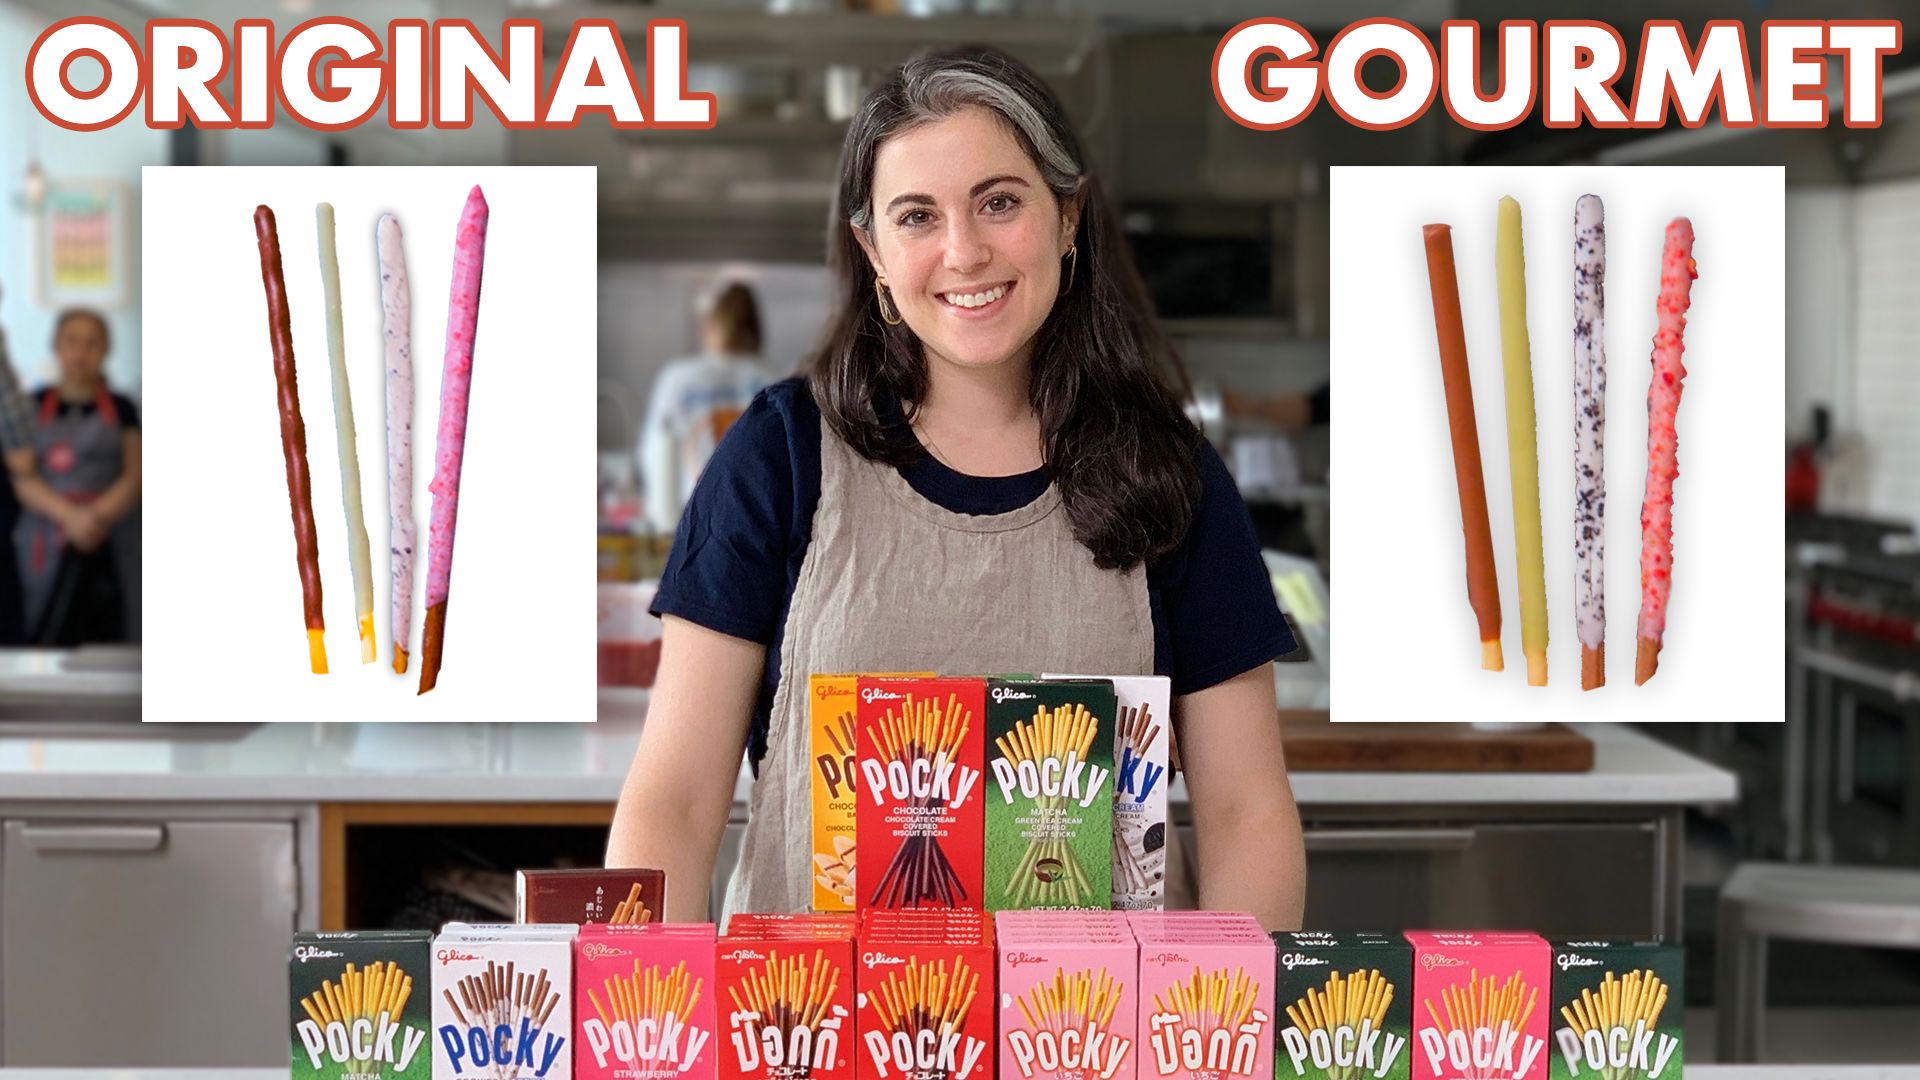 Watch Pastry Chef Attempts to Make Gourmet Pocky, Gourmet Makes